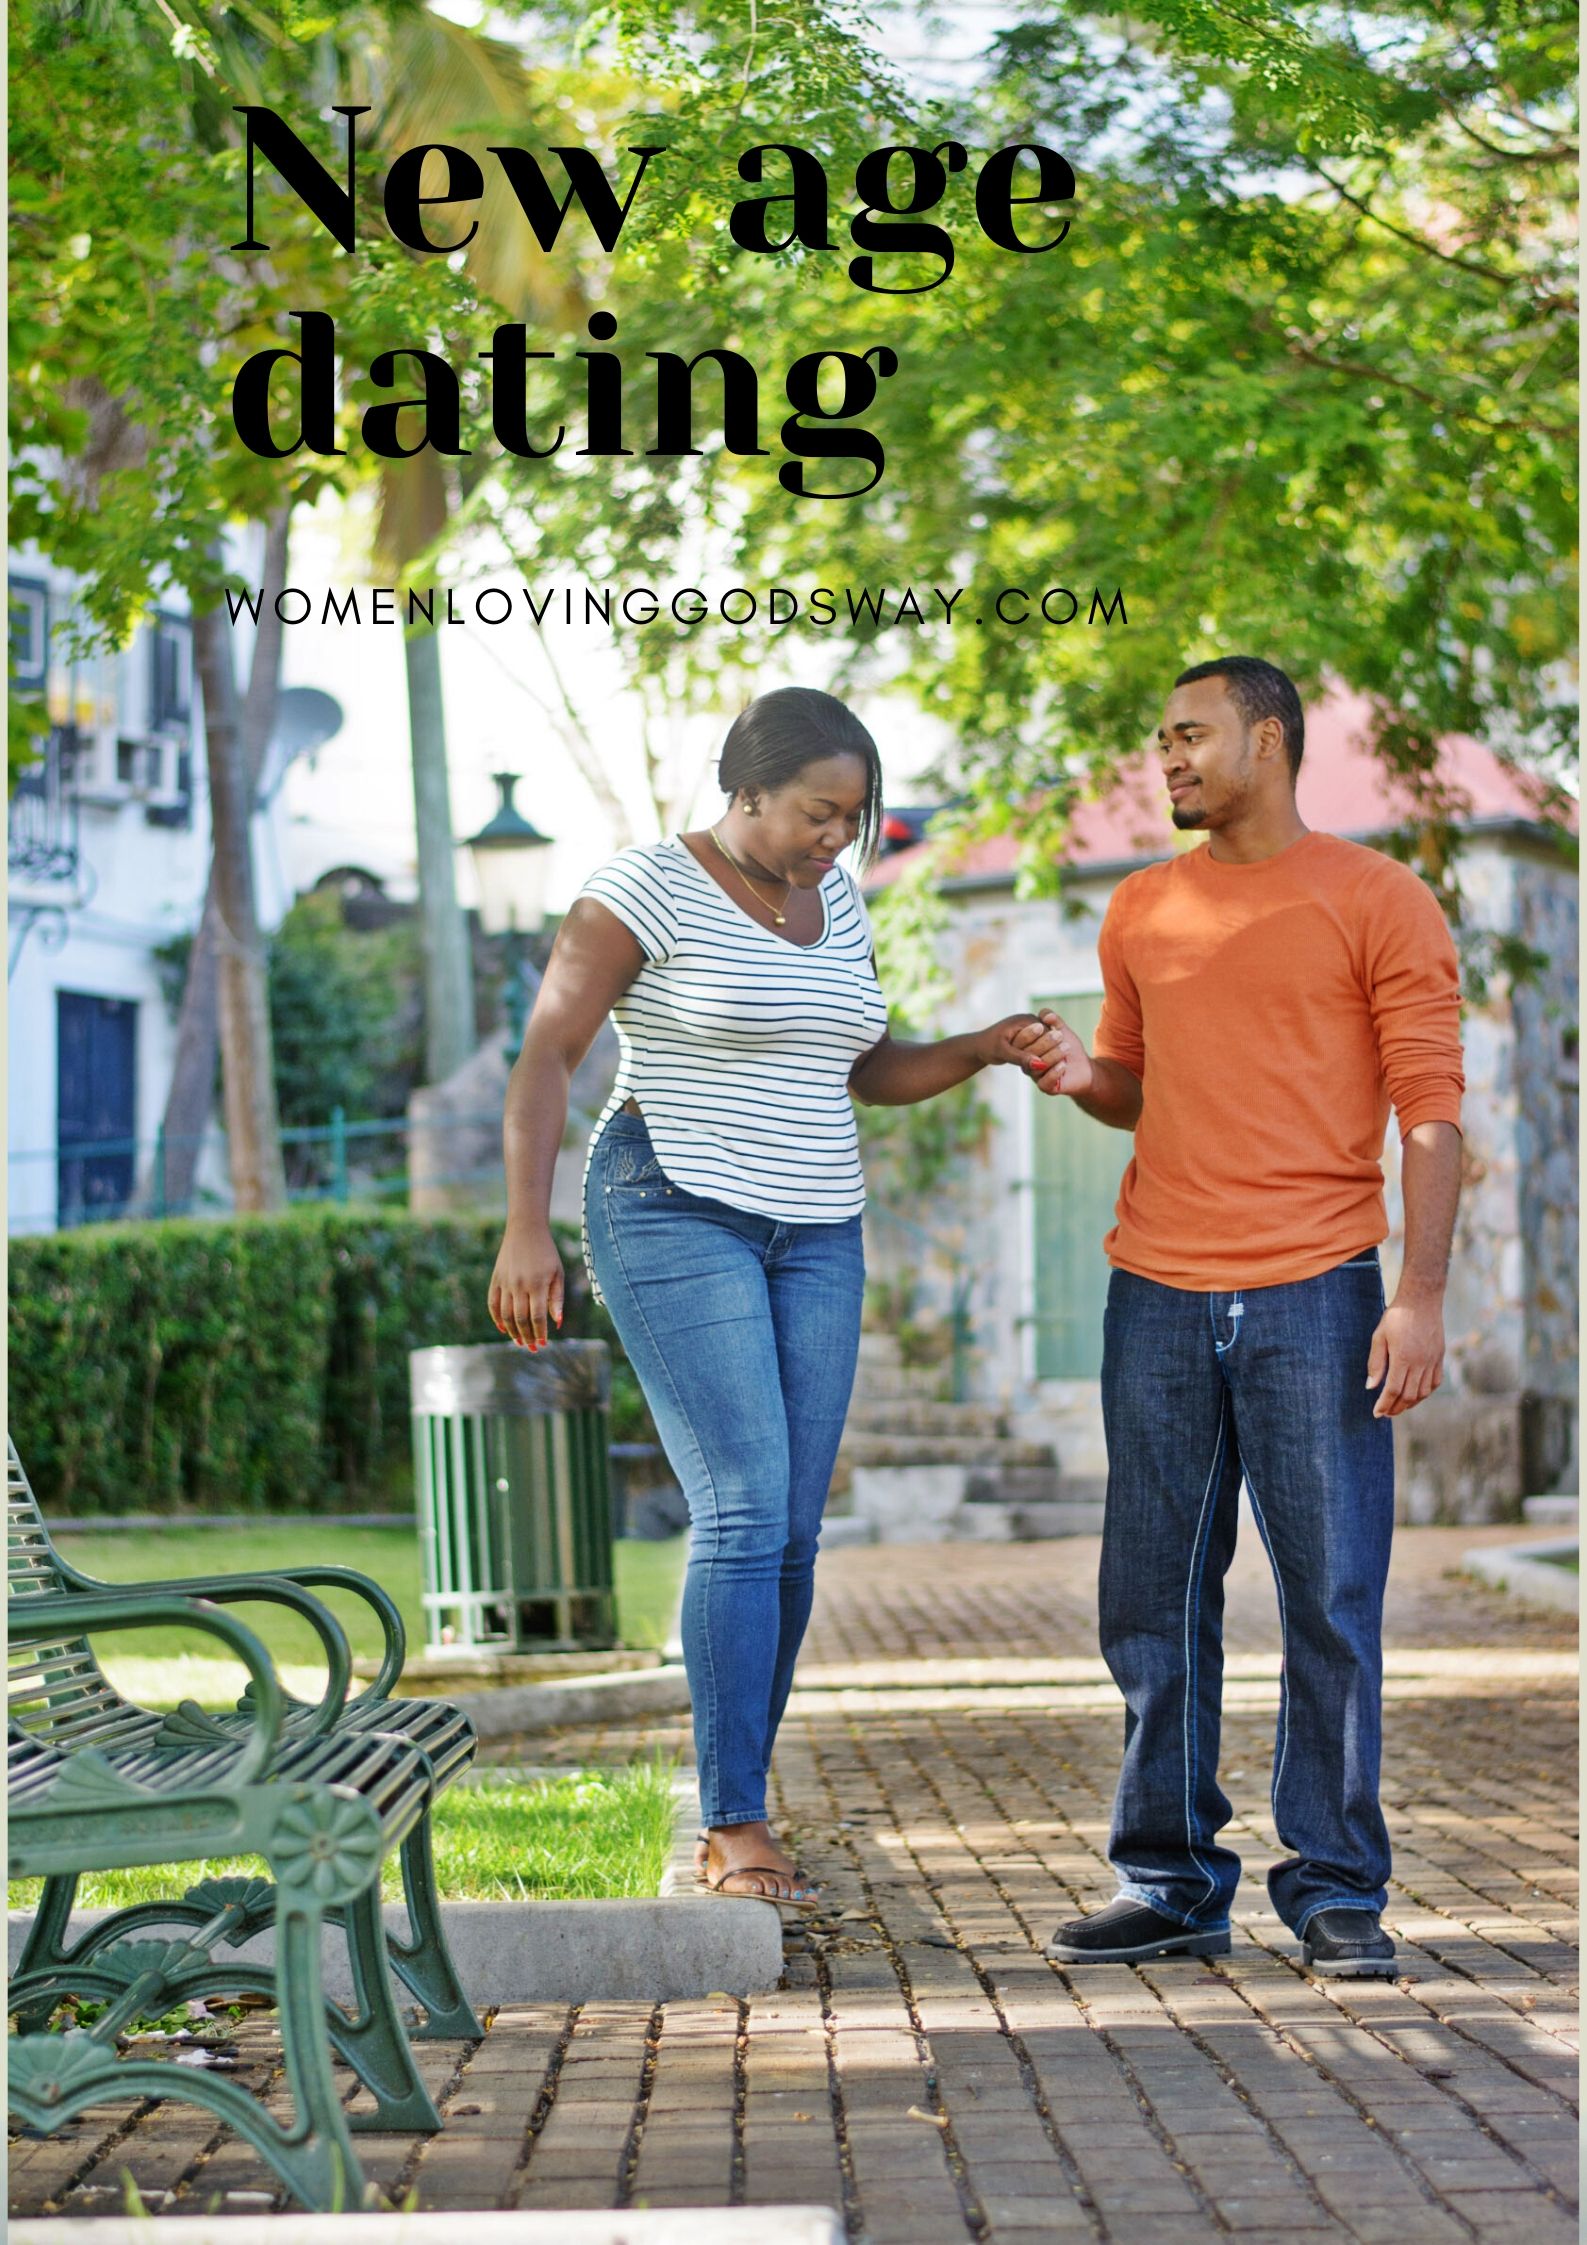 Dating new age New Age